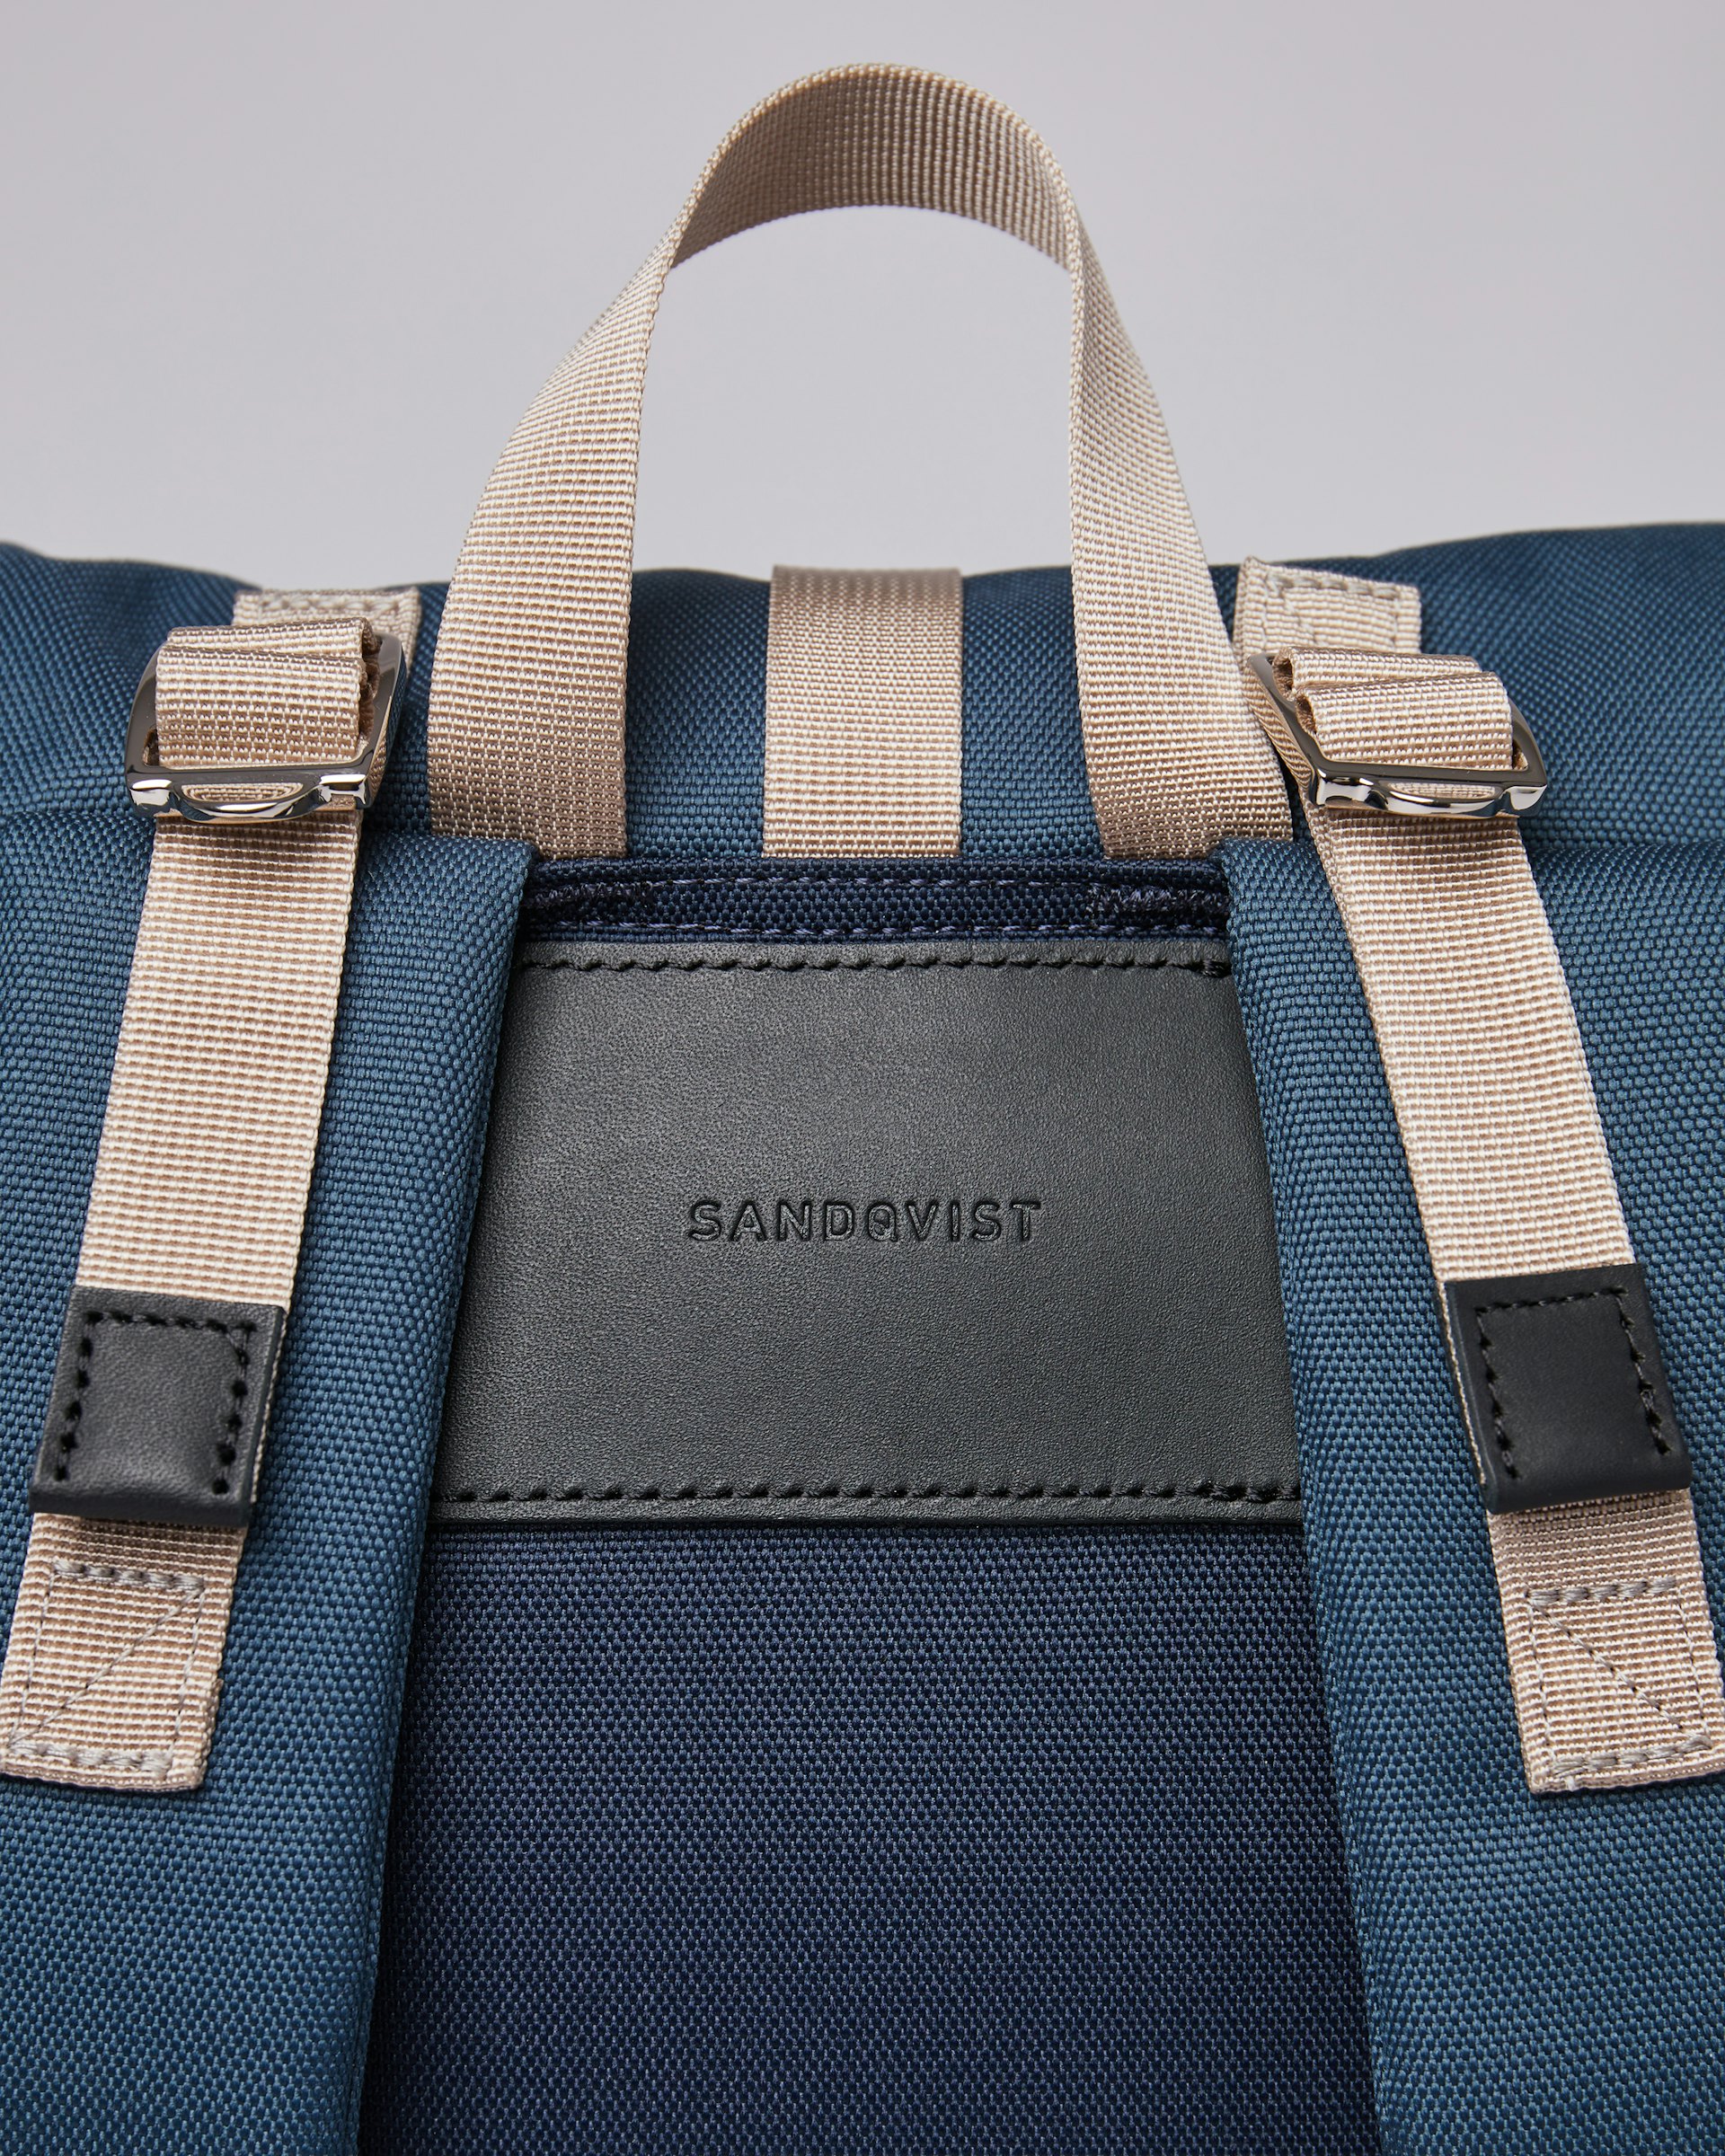 Bernt belongs to the category Backpacks and is in color steel blue & navy (2 of 7)